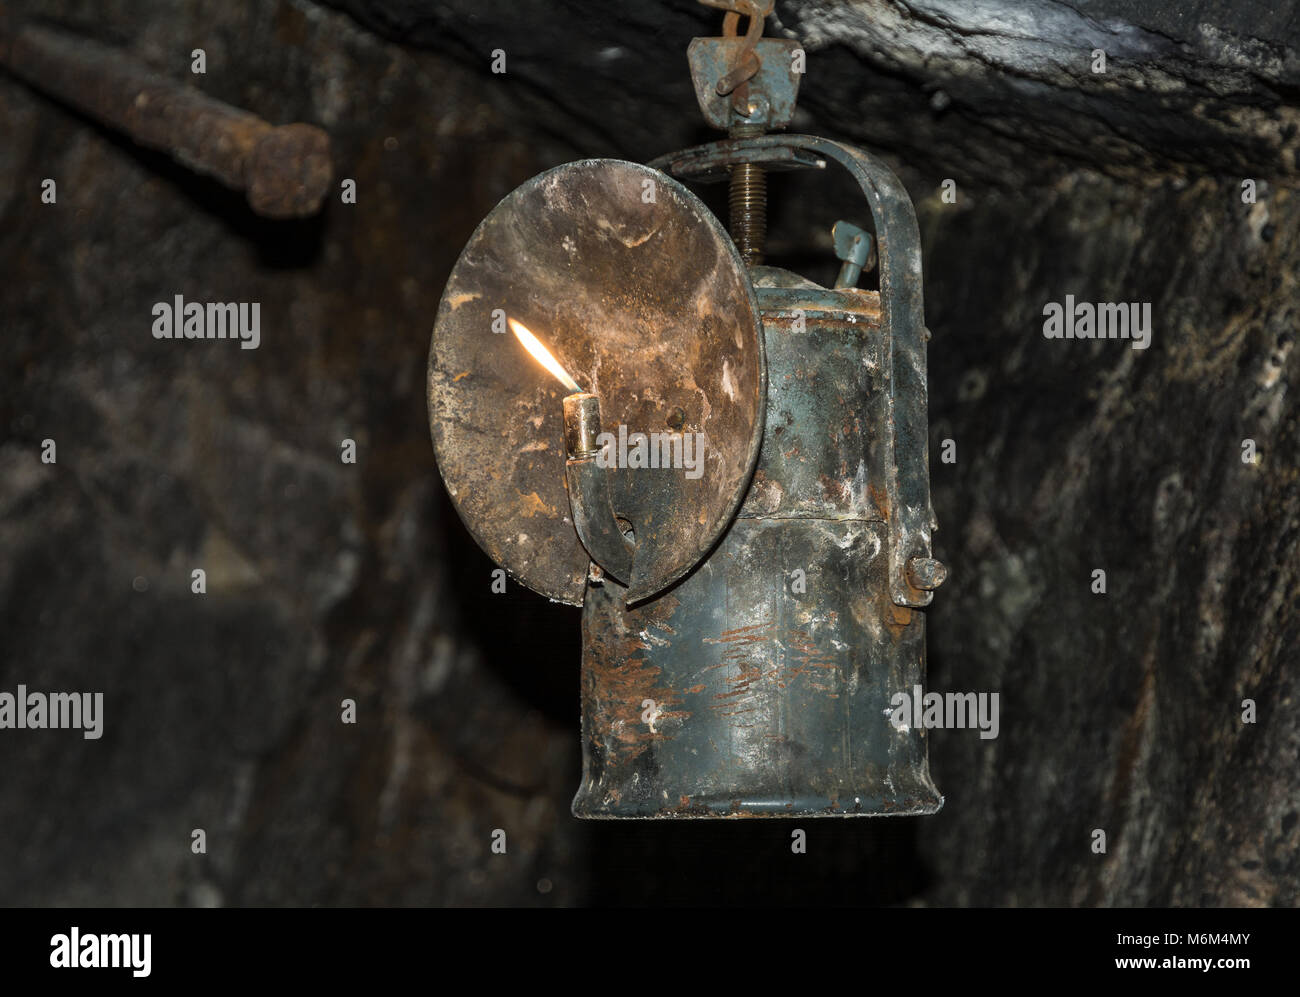 Carbide lamps, or acetylene gas lamps. It is a type of lamp used in the past by miners. It was invented in 1900. Stock Photo